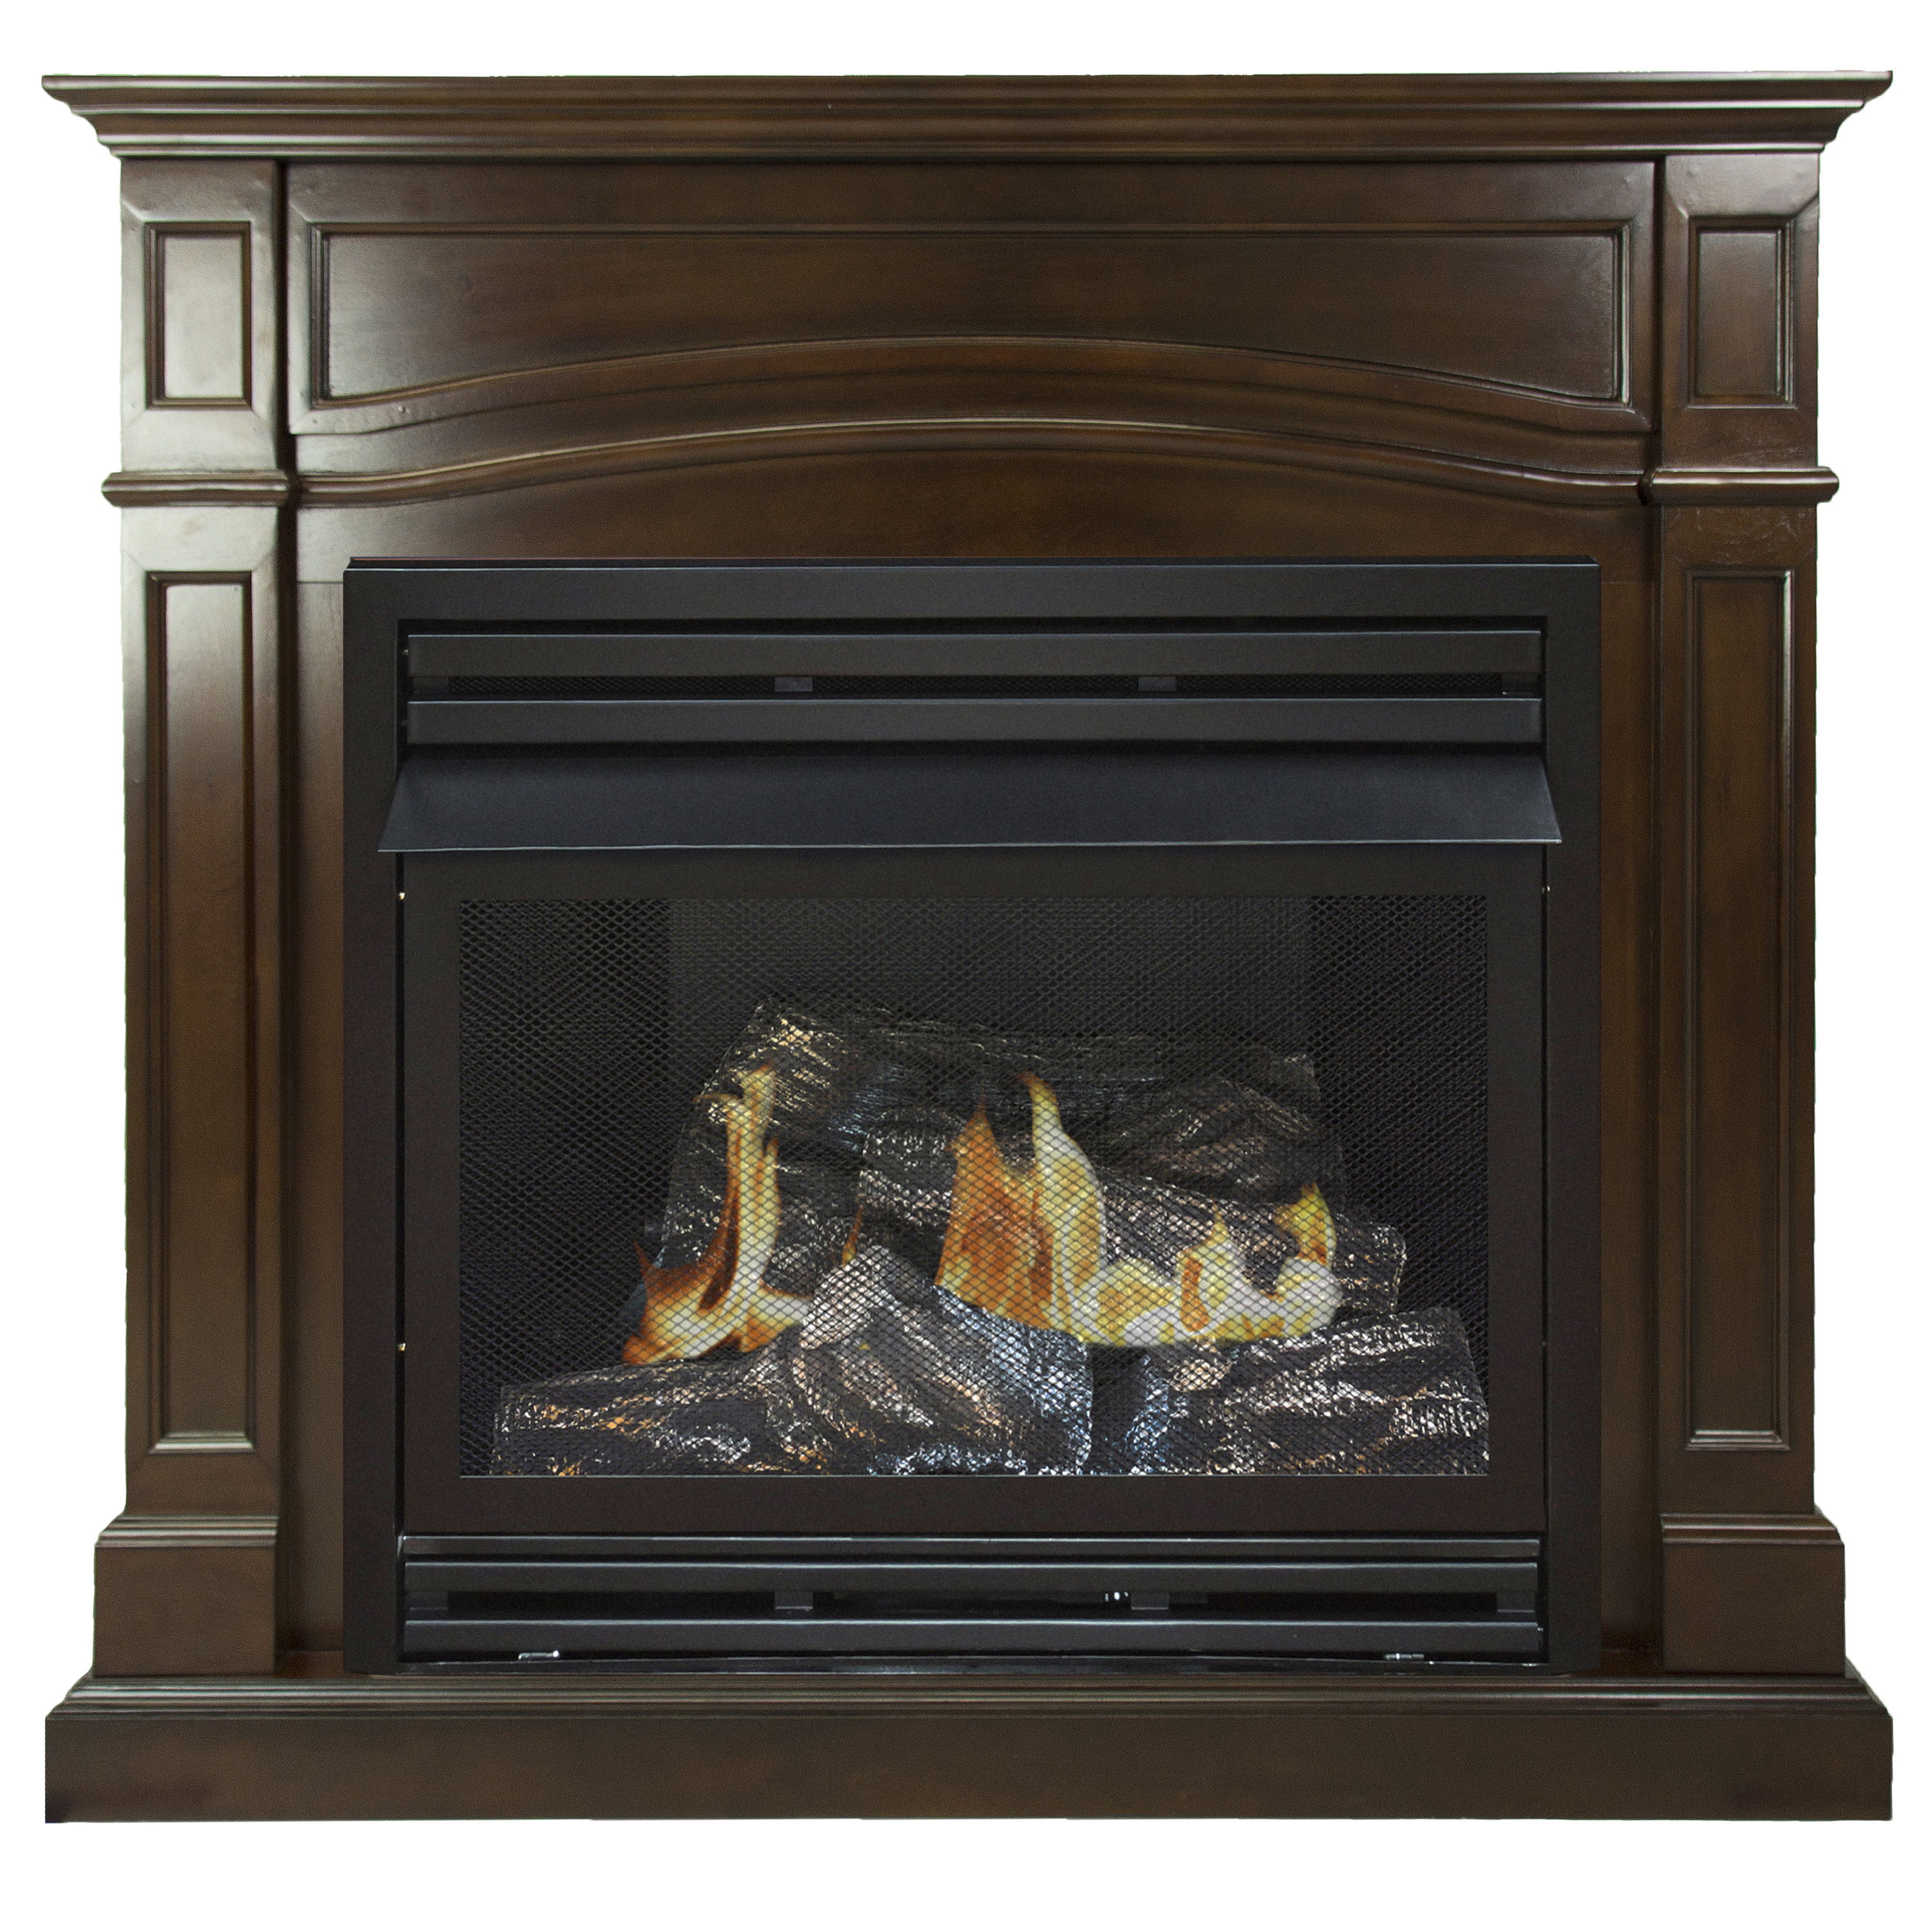 Ultra Thin Gas Fireplaces Best Of Pleasant Hearth 46 In Natural Gas Full Size Cherry Vent Free Fireplace System 32 000 Btu